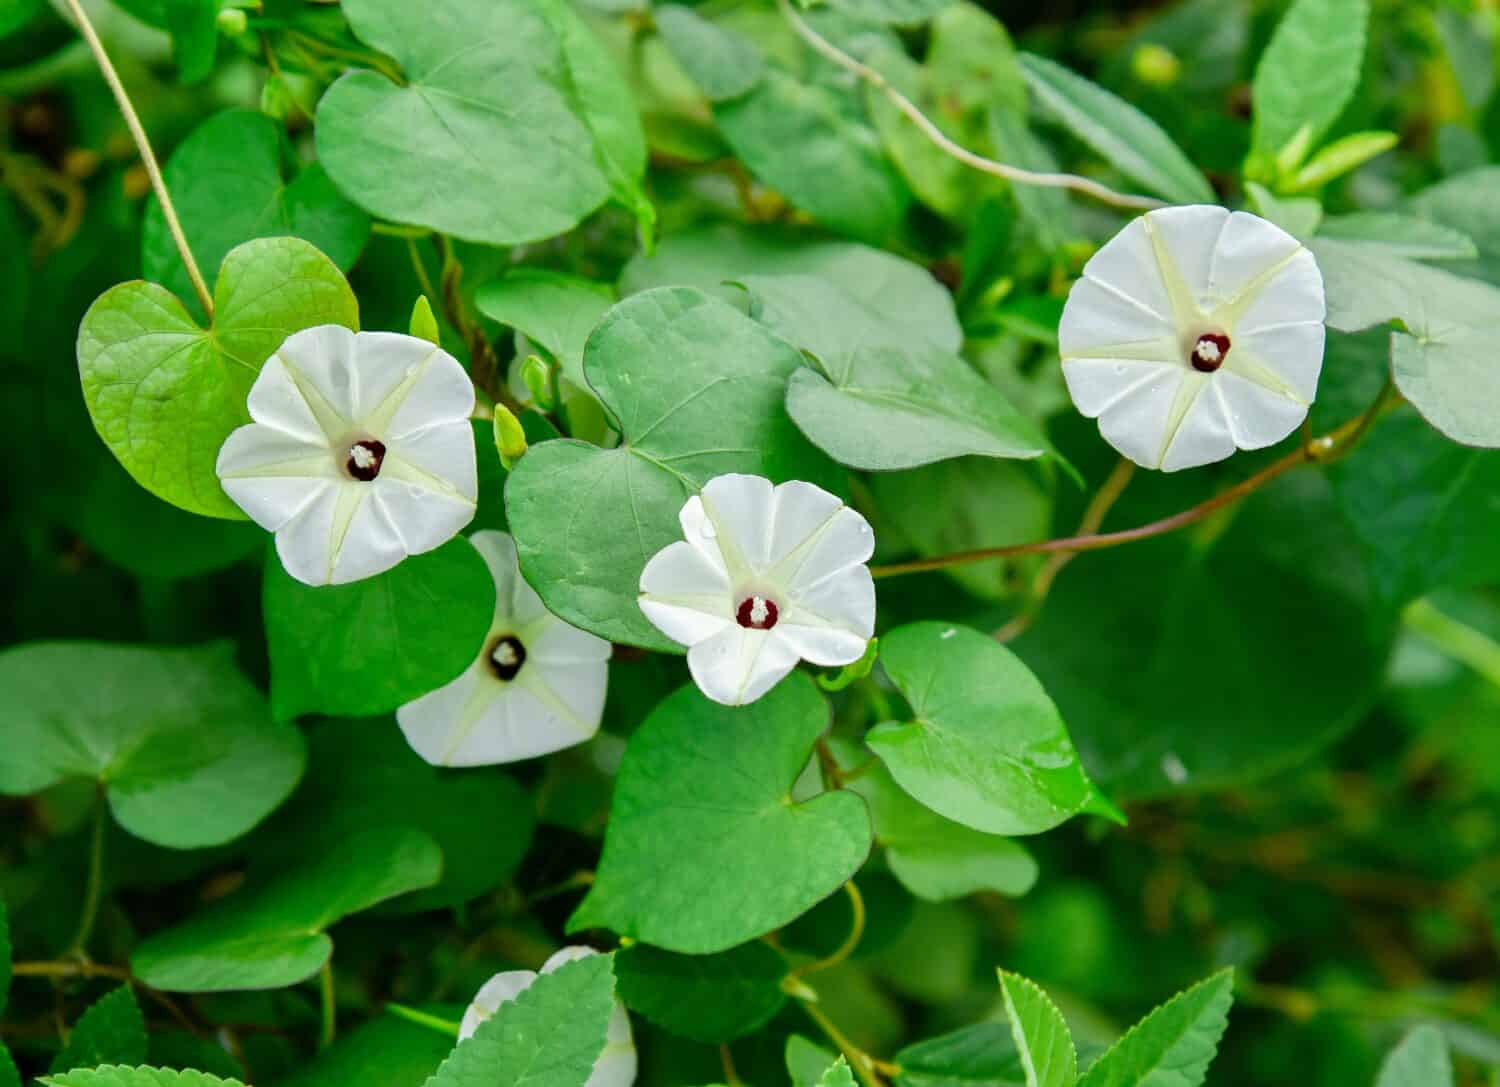 Ipomoea alba, commonly called moonflower, is native to tropical America. It is a tender perennial vine that is grown in St. Louis as a warm weather annual.